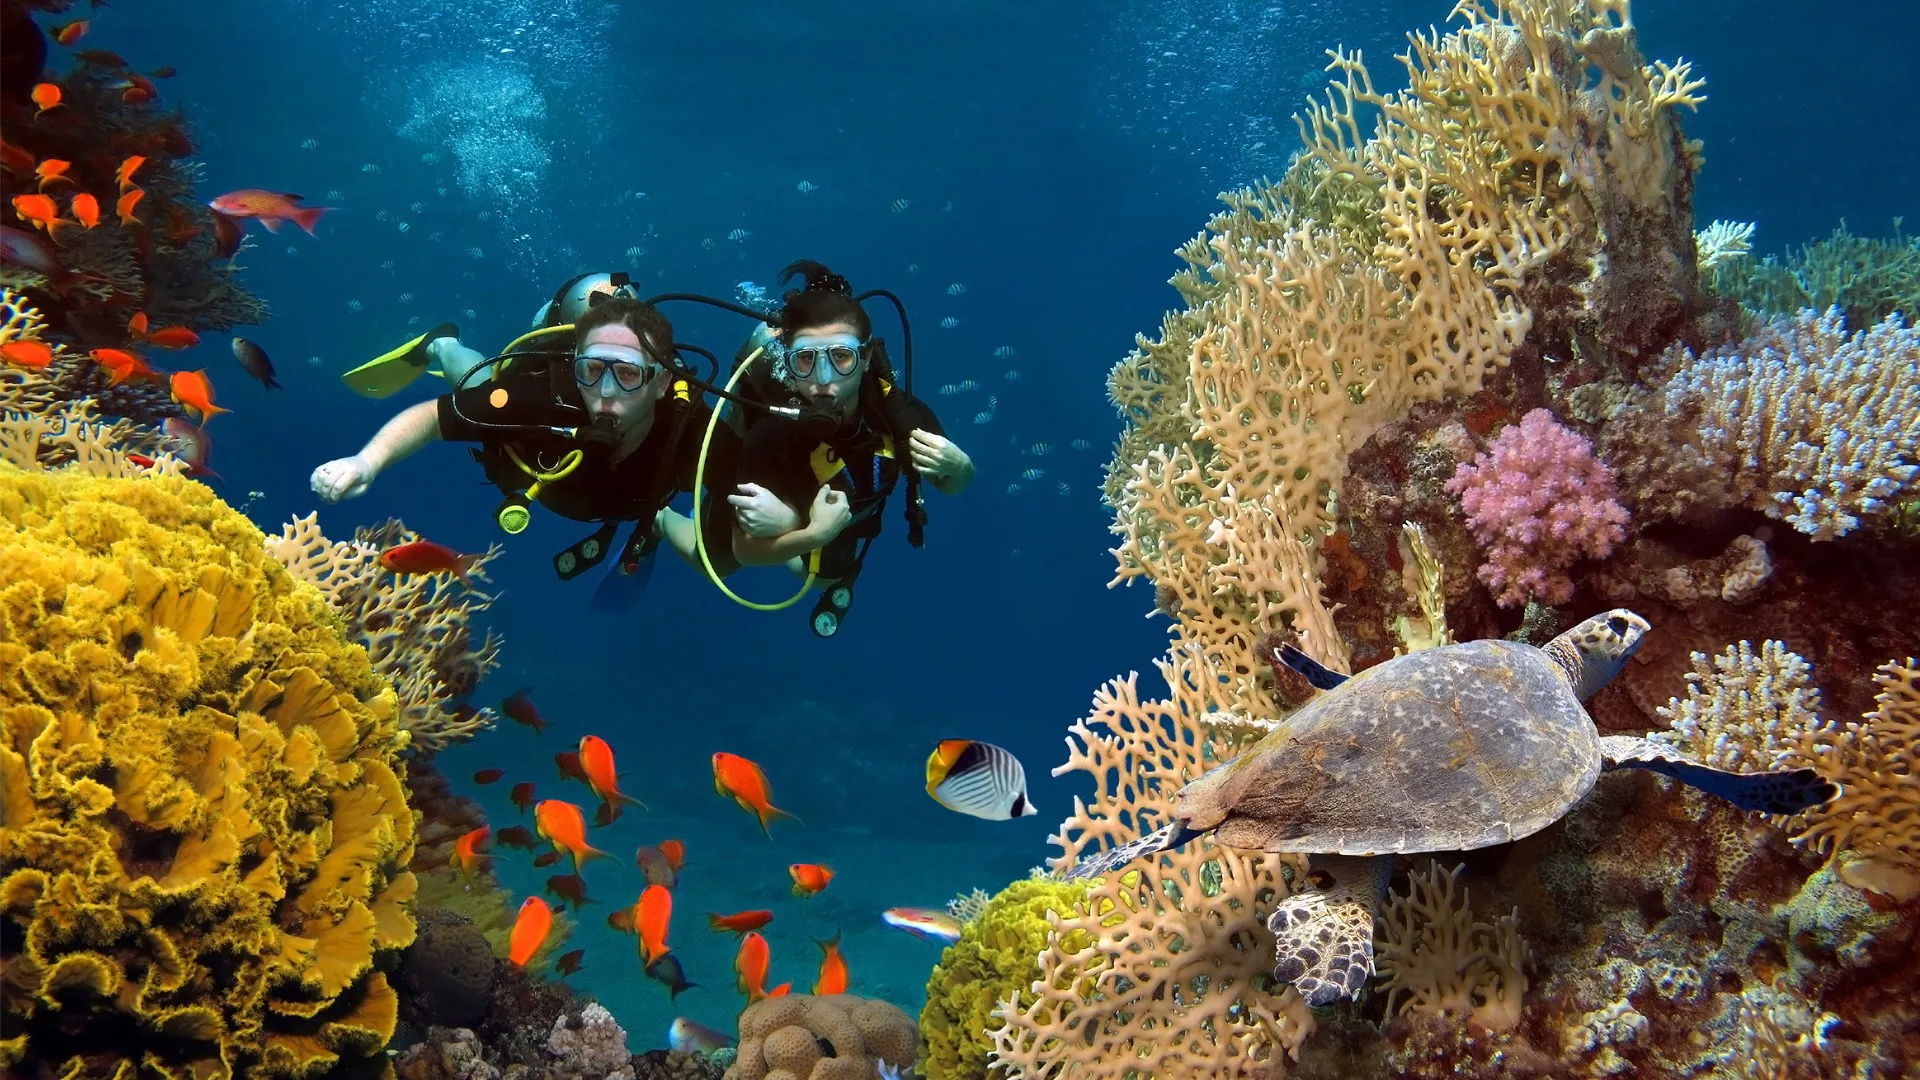 Ocean Wonders in India, Central Asia | Scuba Diving - Rated 4.2